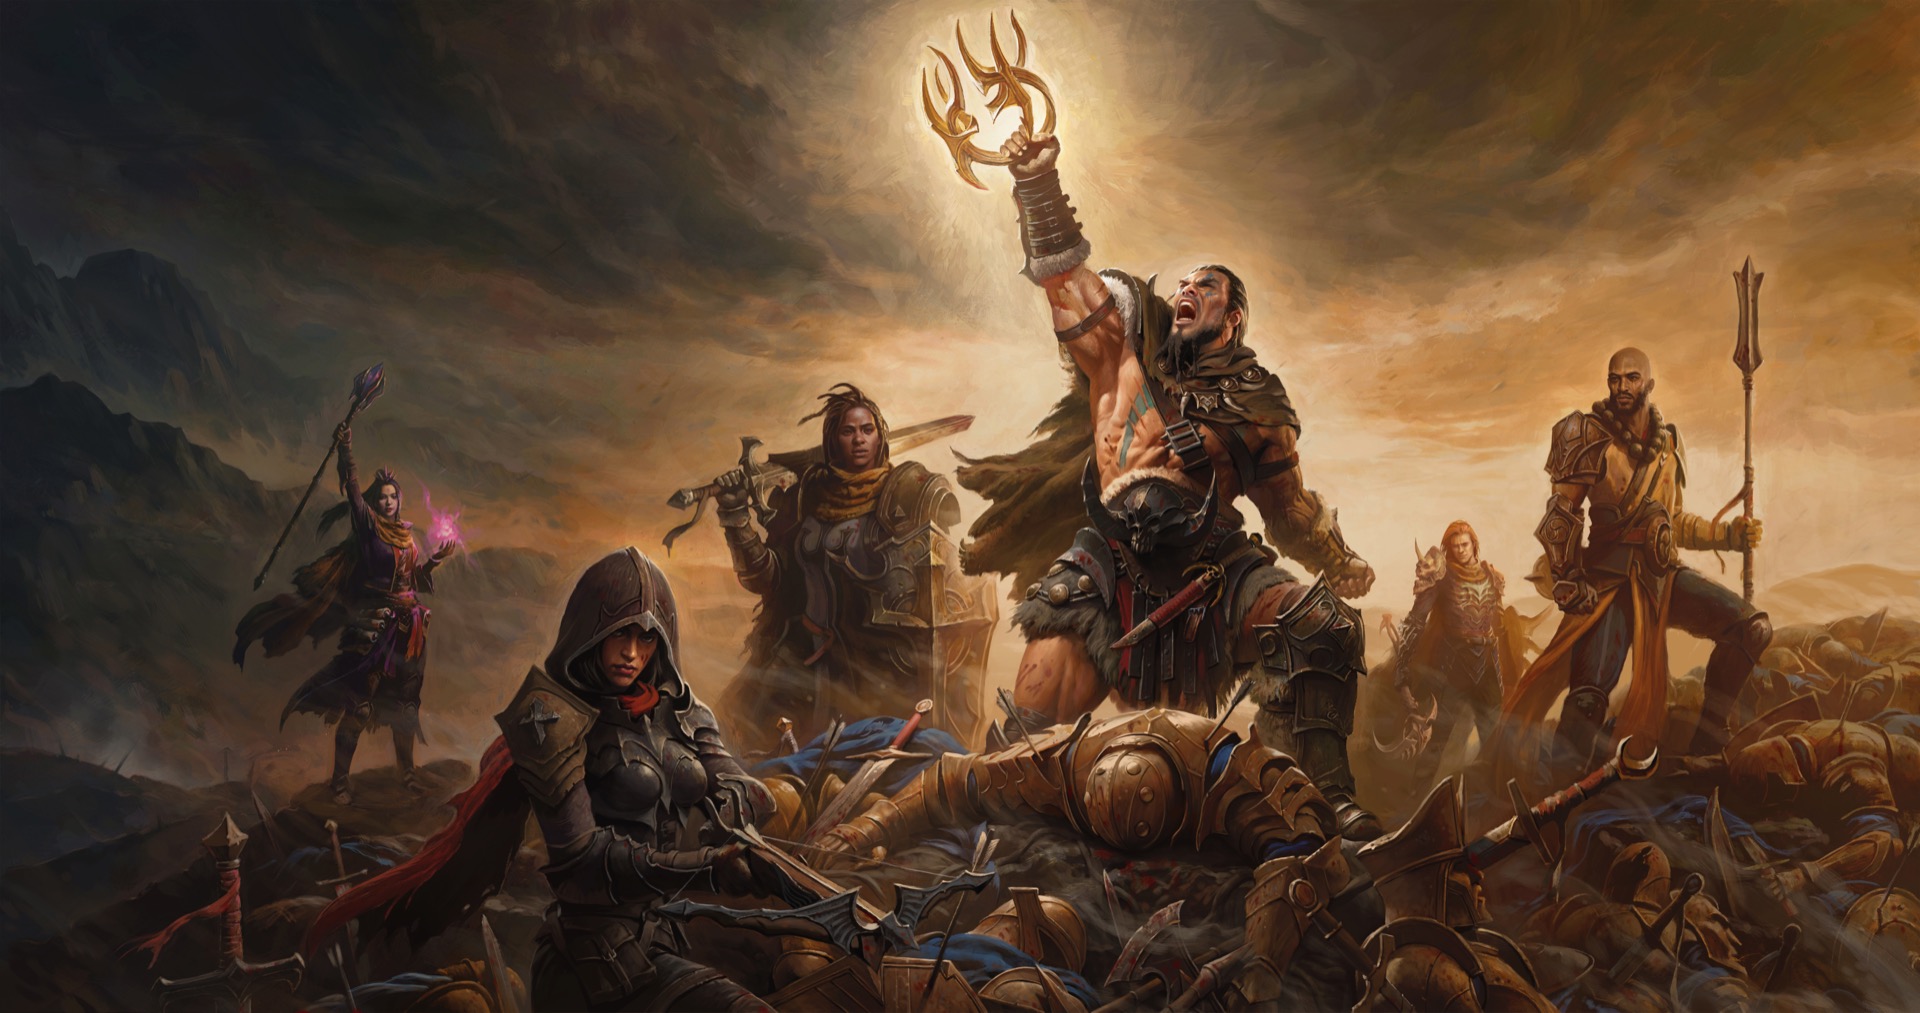 Diablo Immortal Combat Rating and Stats Explained » Amazfeed